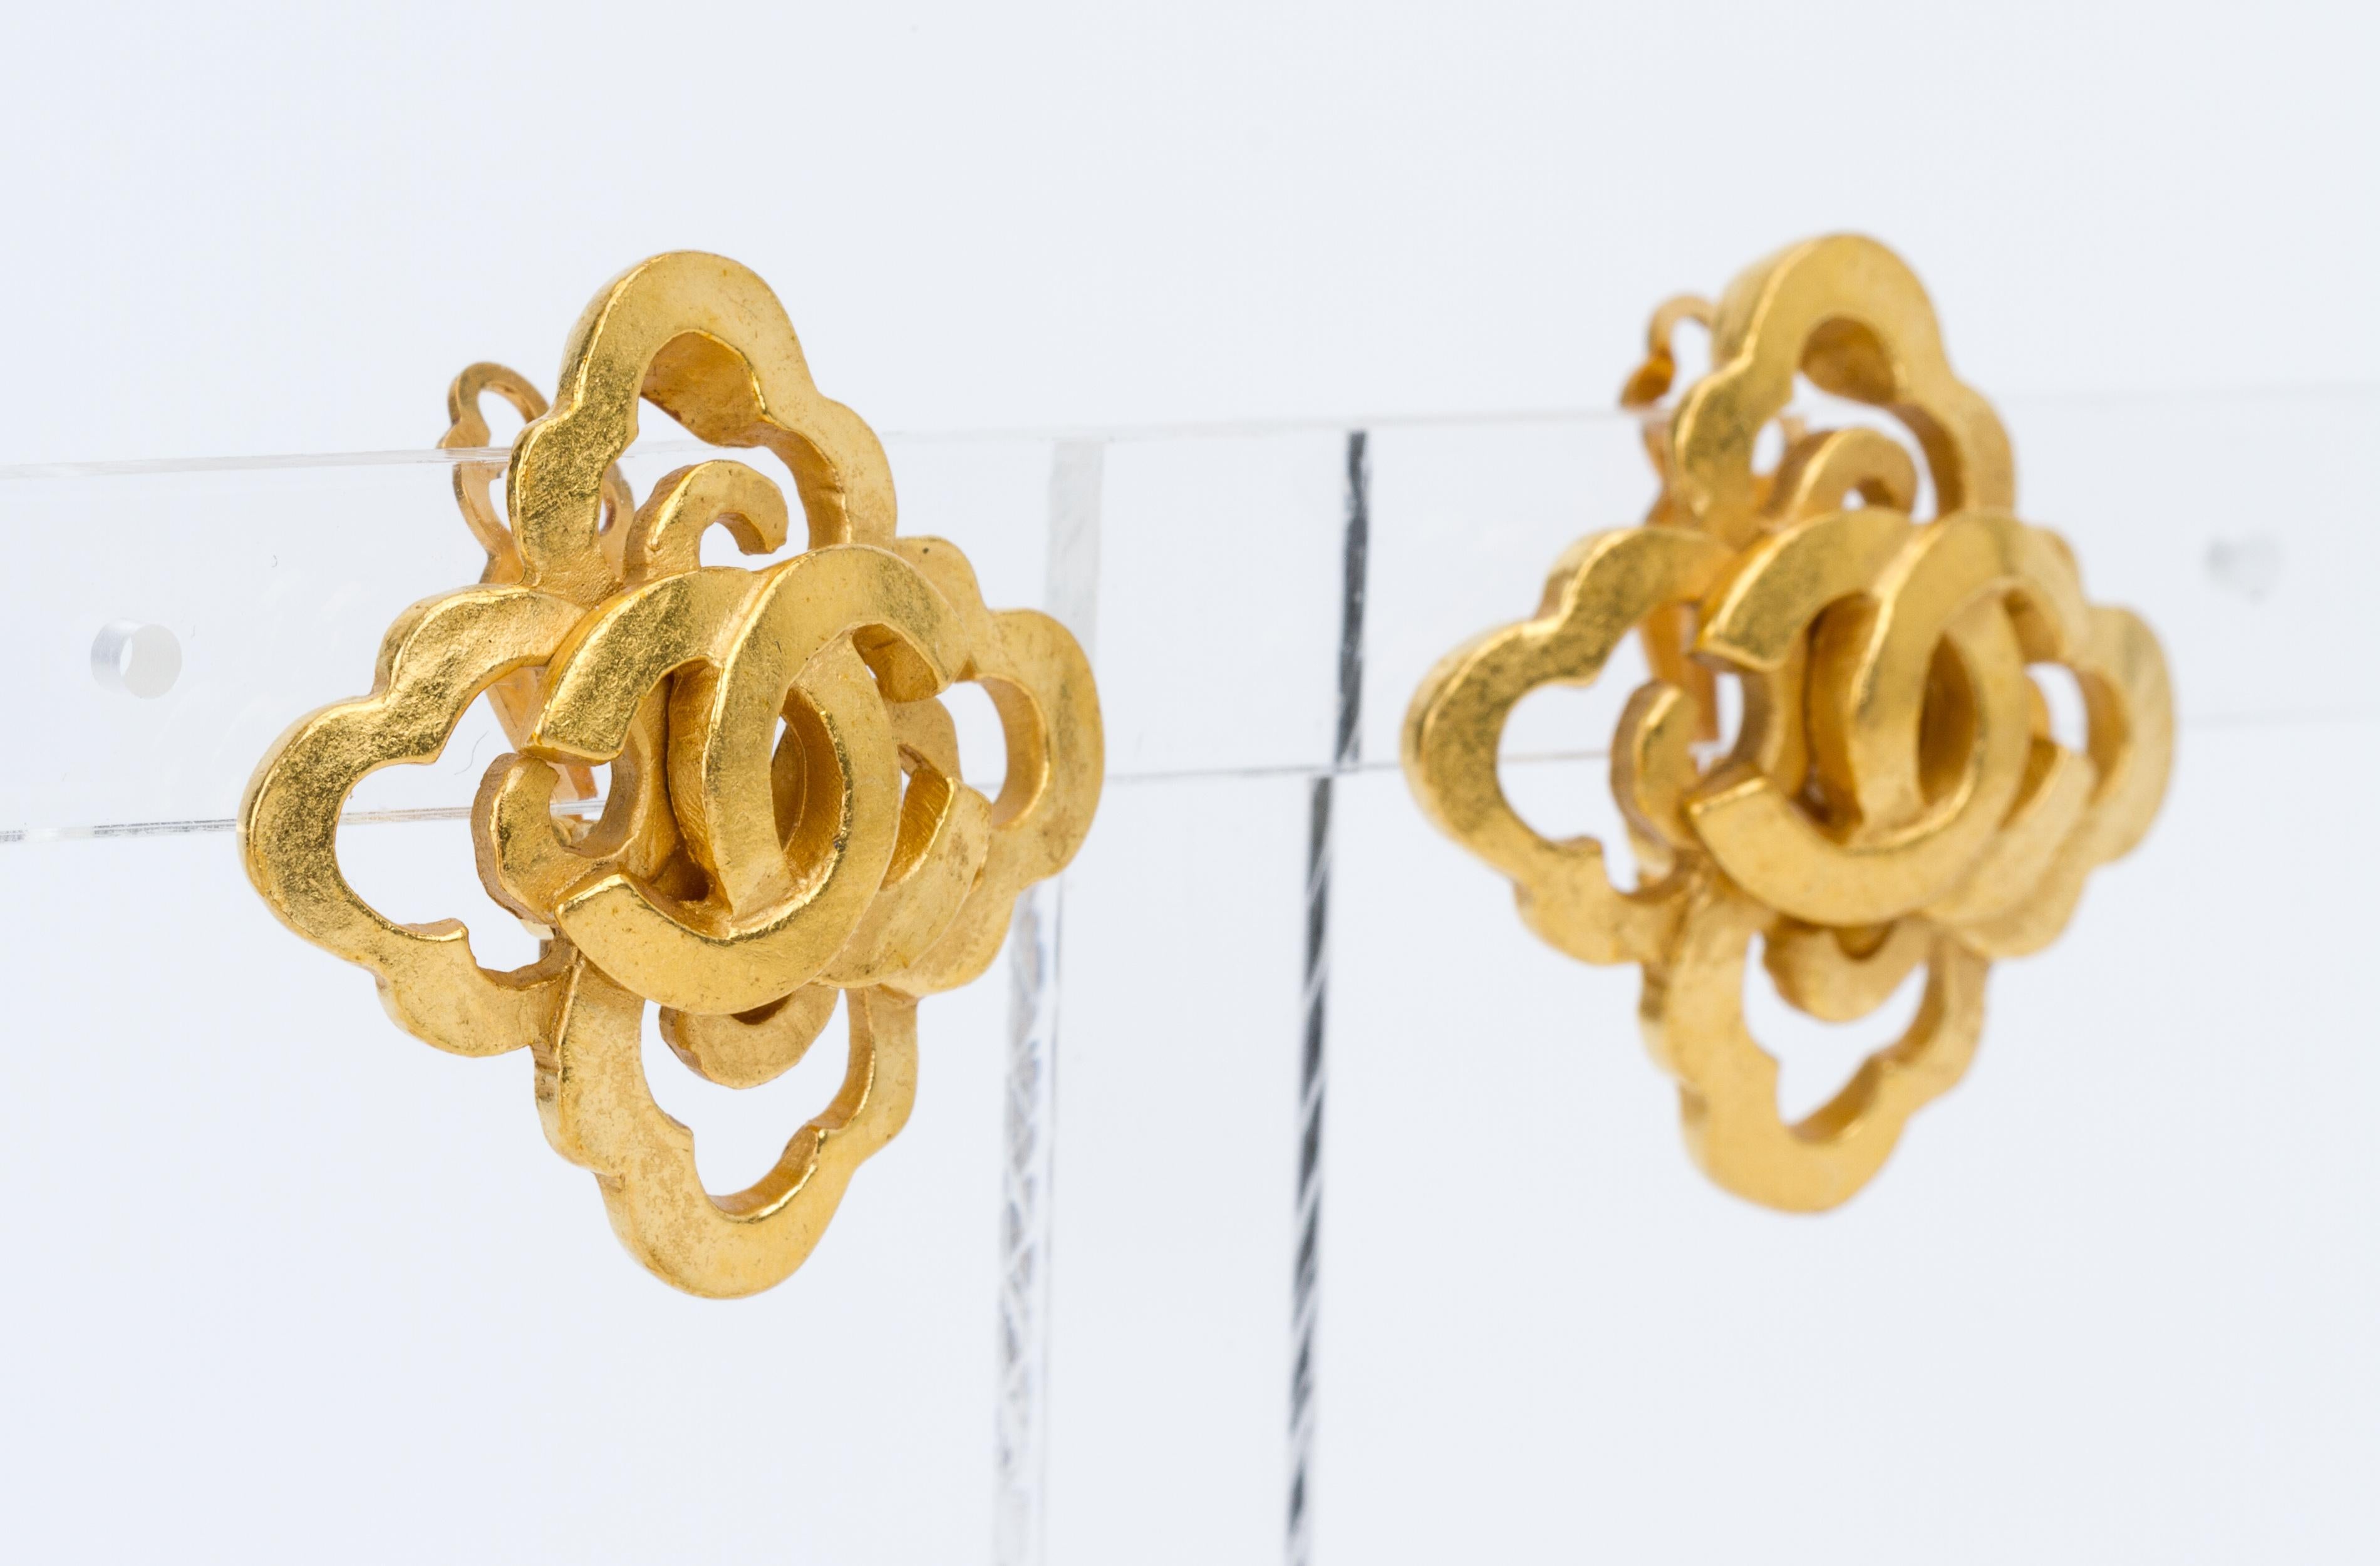 Chanel satin gold logo cc clover clip earrings. Spring 97 collection. Come with velvet pouch.